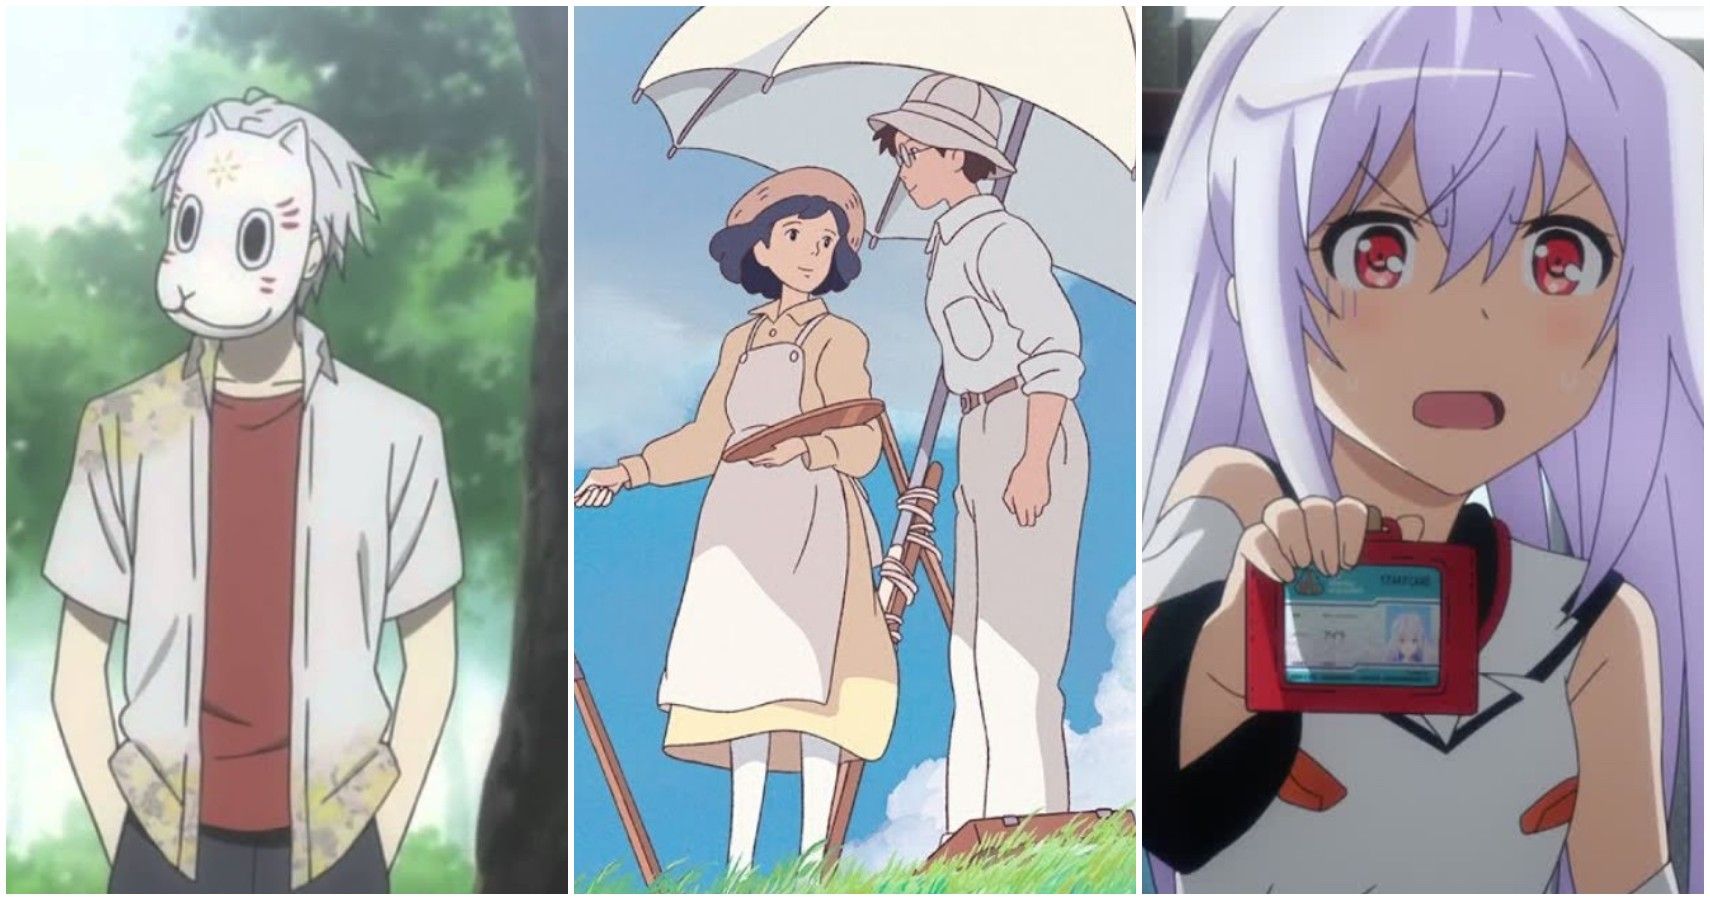 17 Romantic-Drama Anime That Will Mess With Your Feelings - The RamenSwag